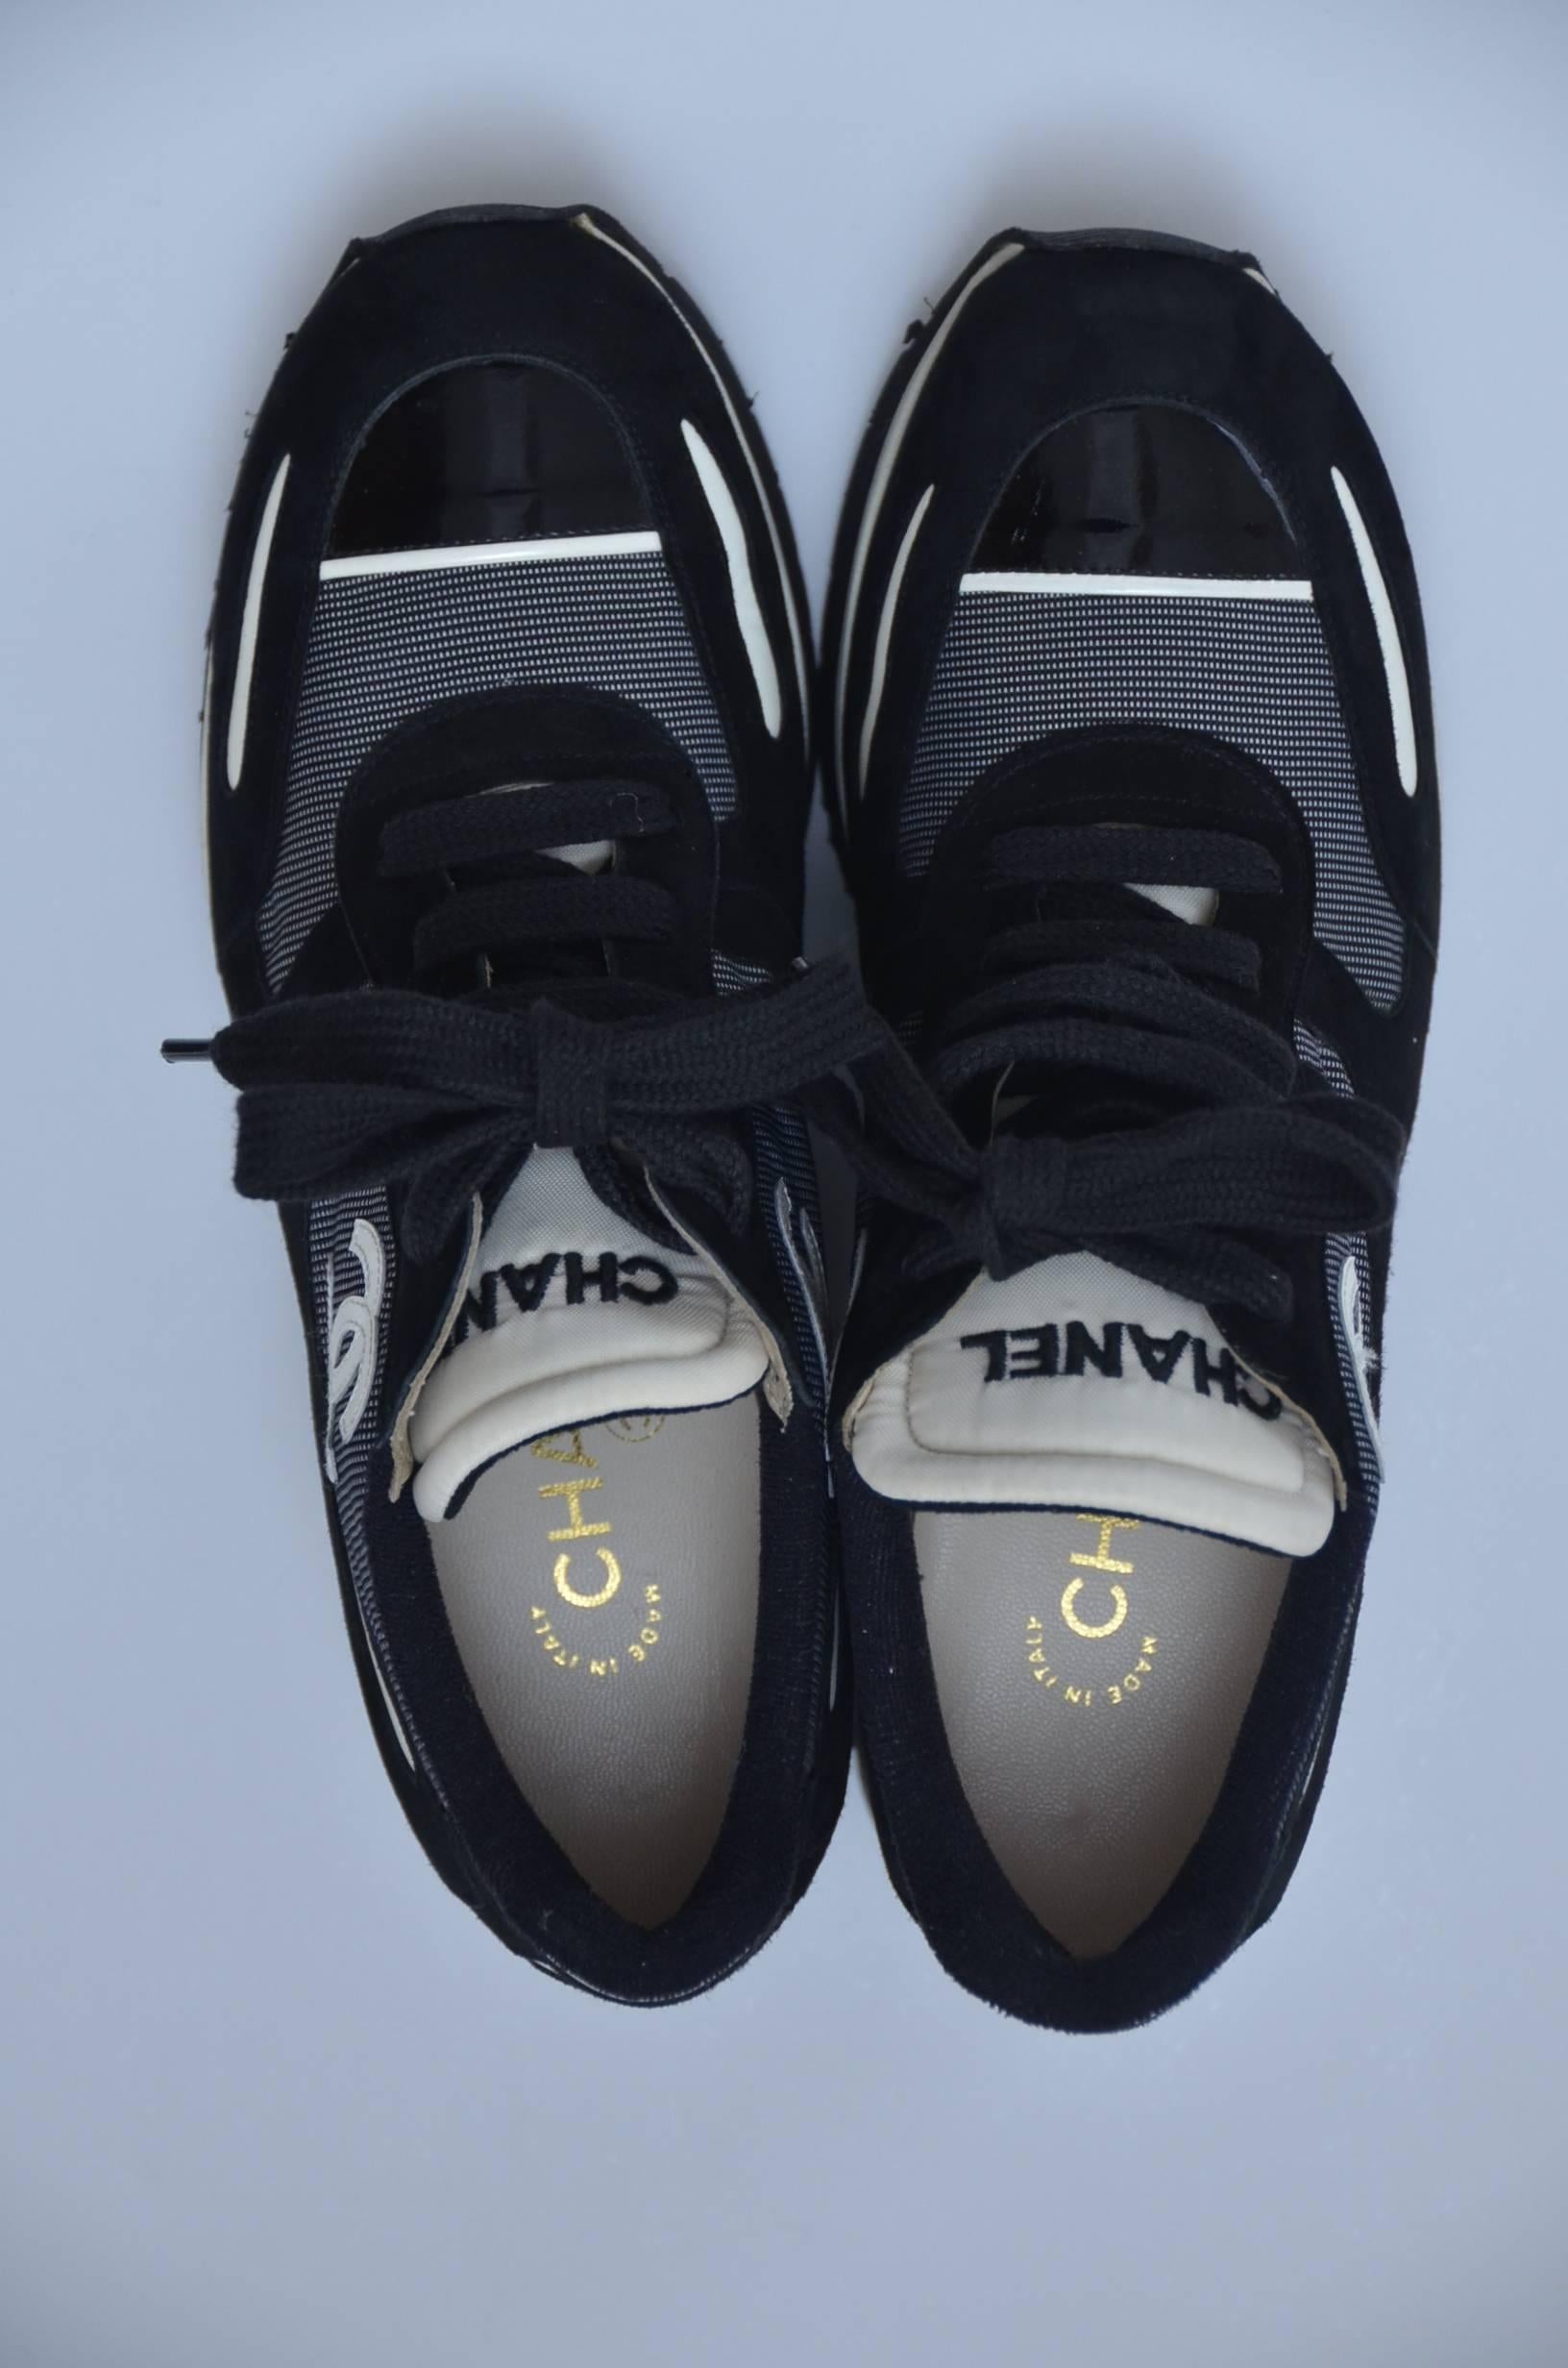 Chanel platform shoes/sneakers .
Brand new ,never worn with dust bags.
Purchased in 1997.
Inside lined in leather,outside :black suede leather with fabric mix with off white CC embroidered on all 4 sides.
Stylish and unique sneakers from  Chanel